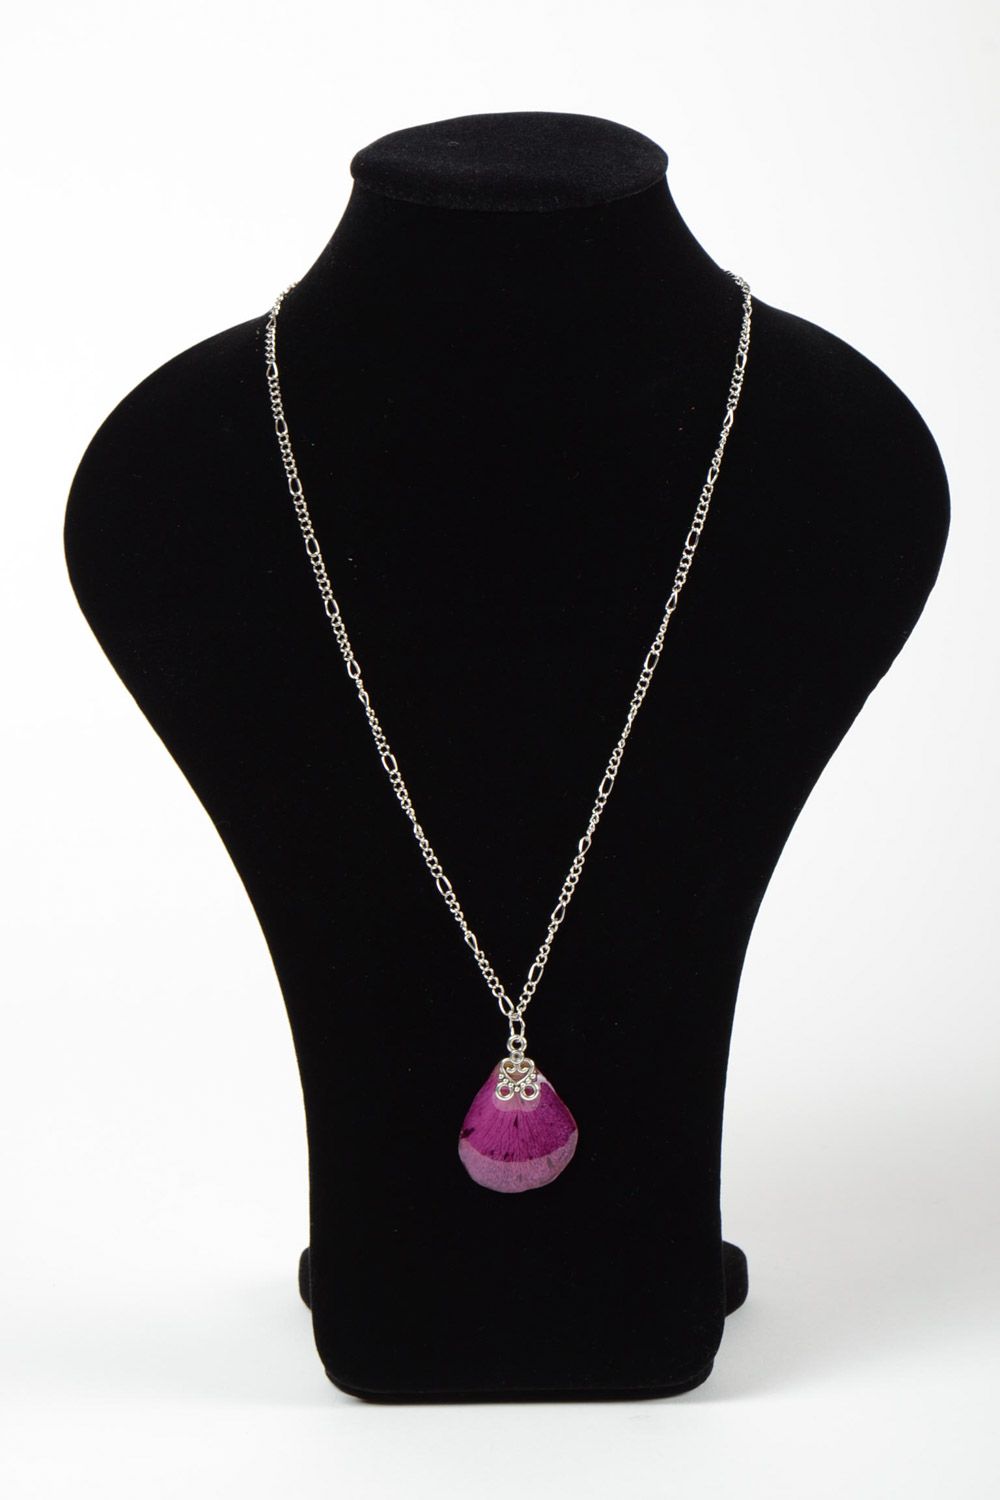 Handmade designer pendant with lilac flower petal in epoxy resin on chain photo 2